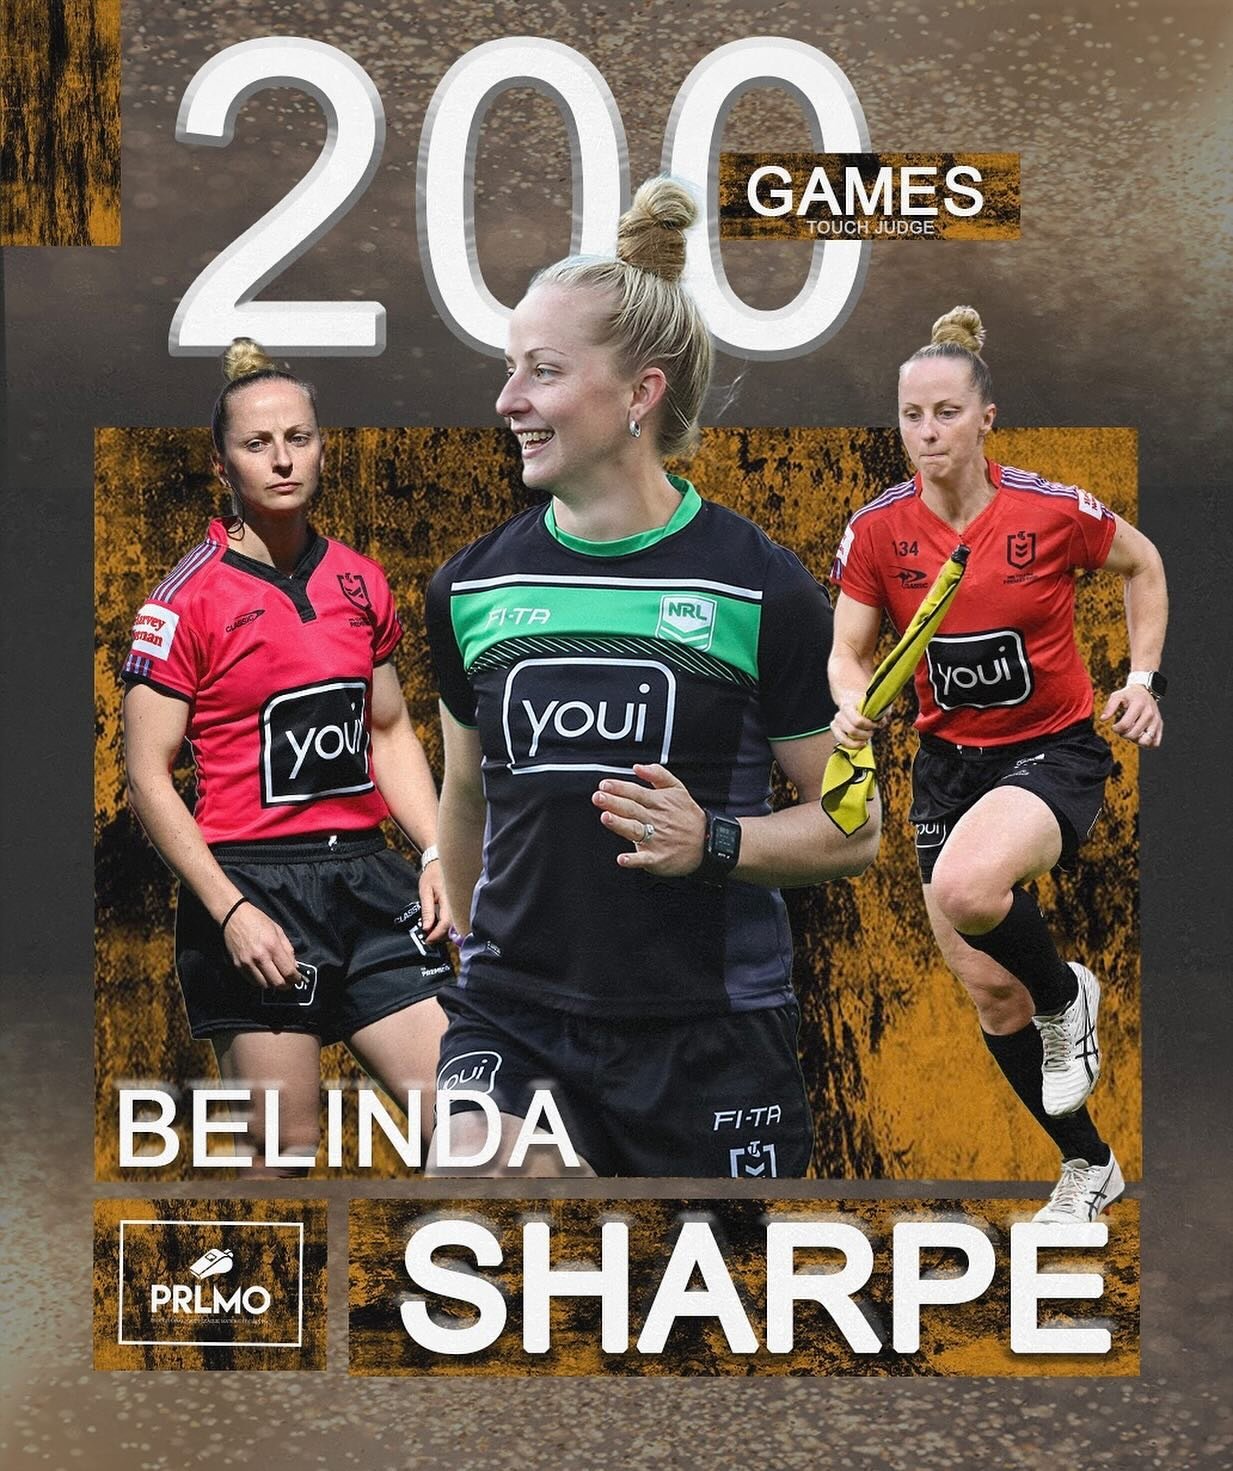 🄼🄸🄻🄴🅂🅃🄾🄽🄴 🄼🄾🄼🄴🄽🅃

Congratulations 👏 to Belinda Sharpe who will touch judge NRL game number 2️⃣0️⃣0️⃣ of her career when the Titans play the Sea Eagles at Cbus Super Stadium today.

Growing up in Rockhampton, Central Queensland, Belind